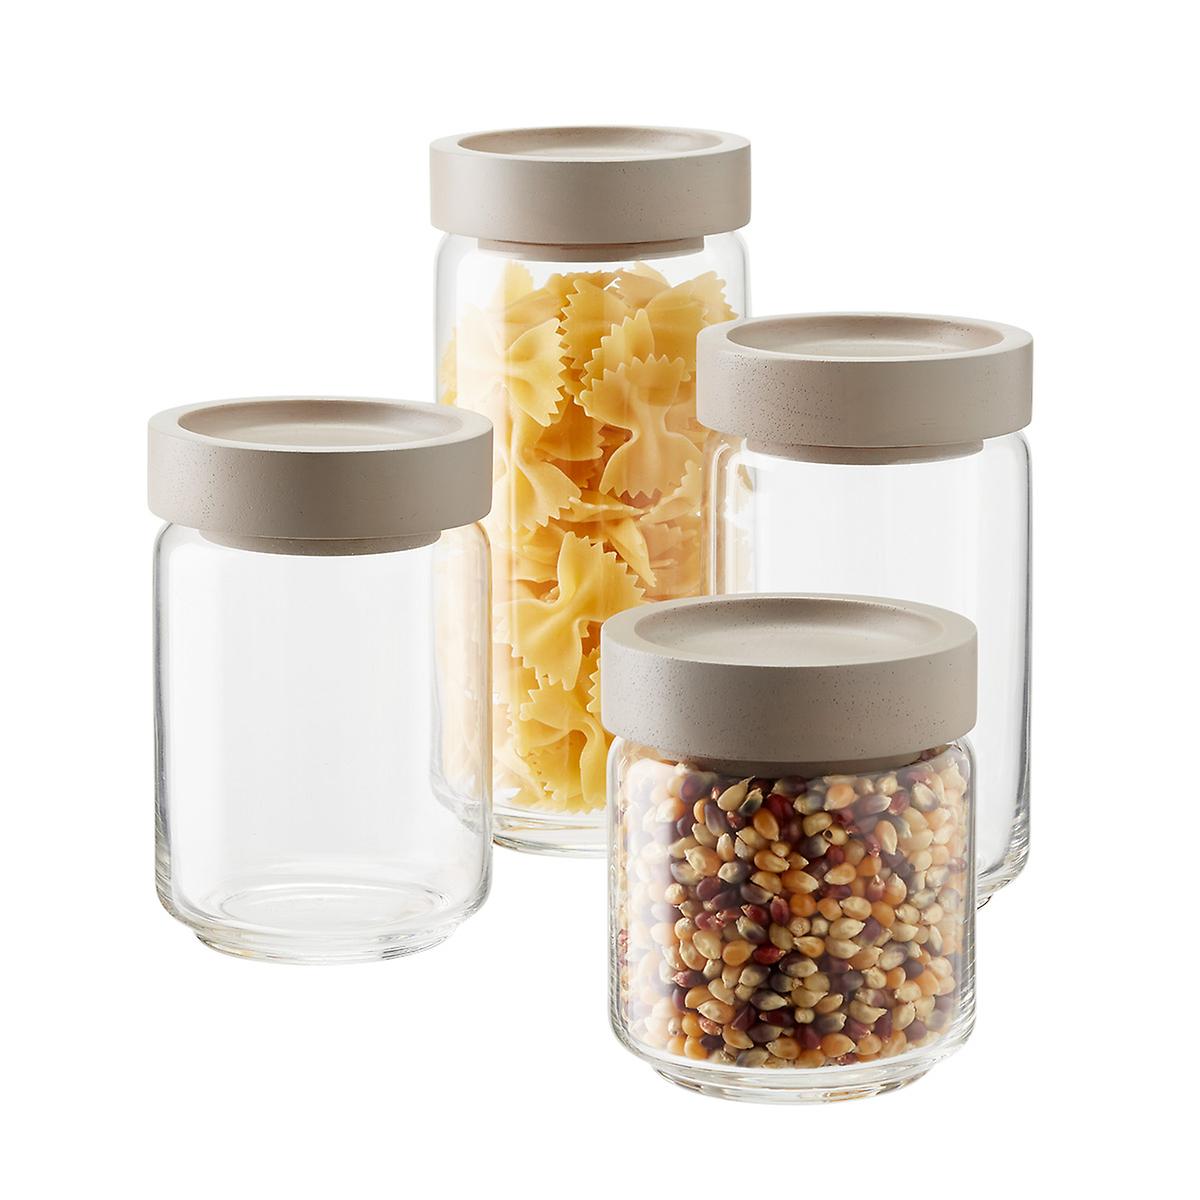 Glass container for storing food